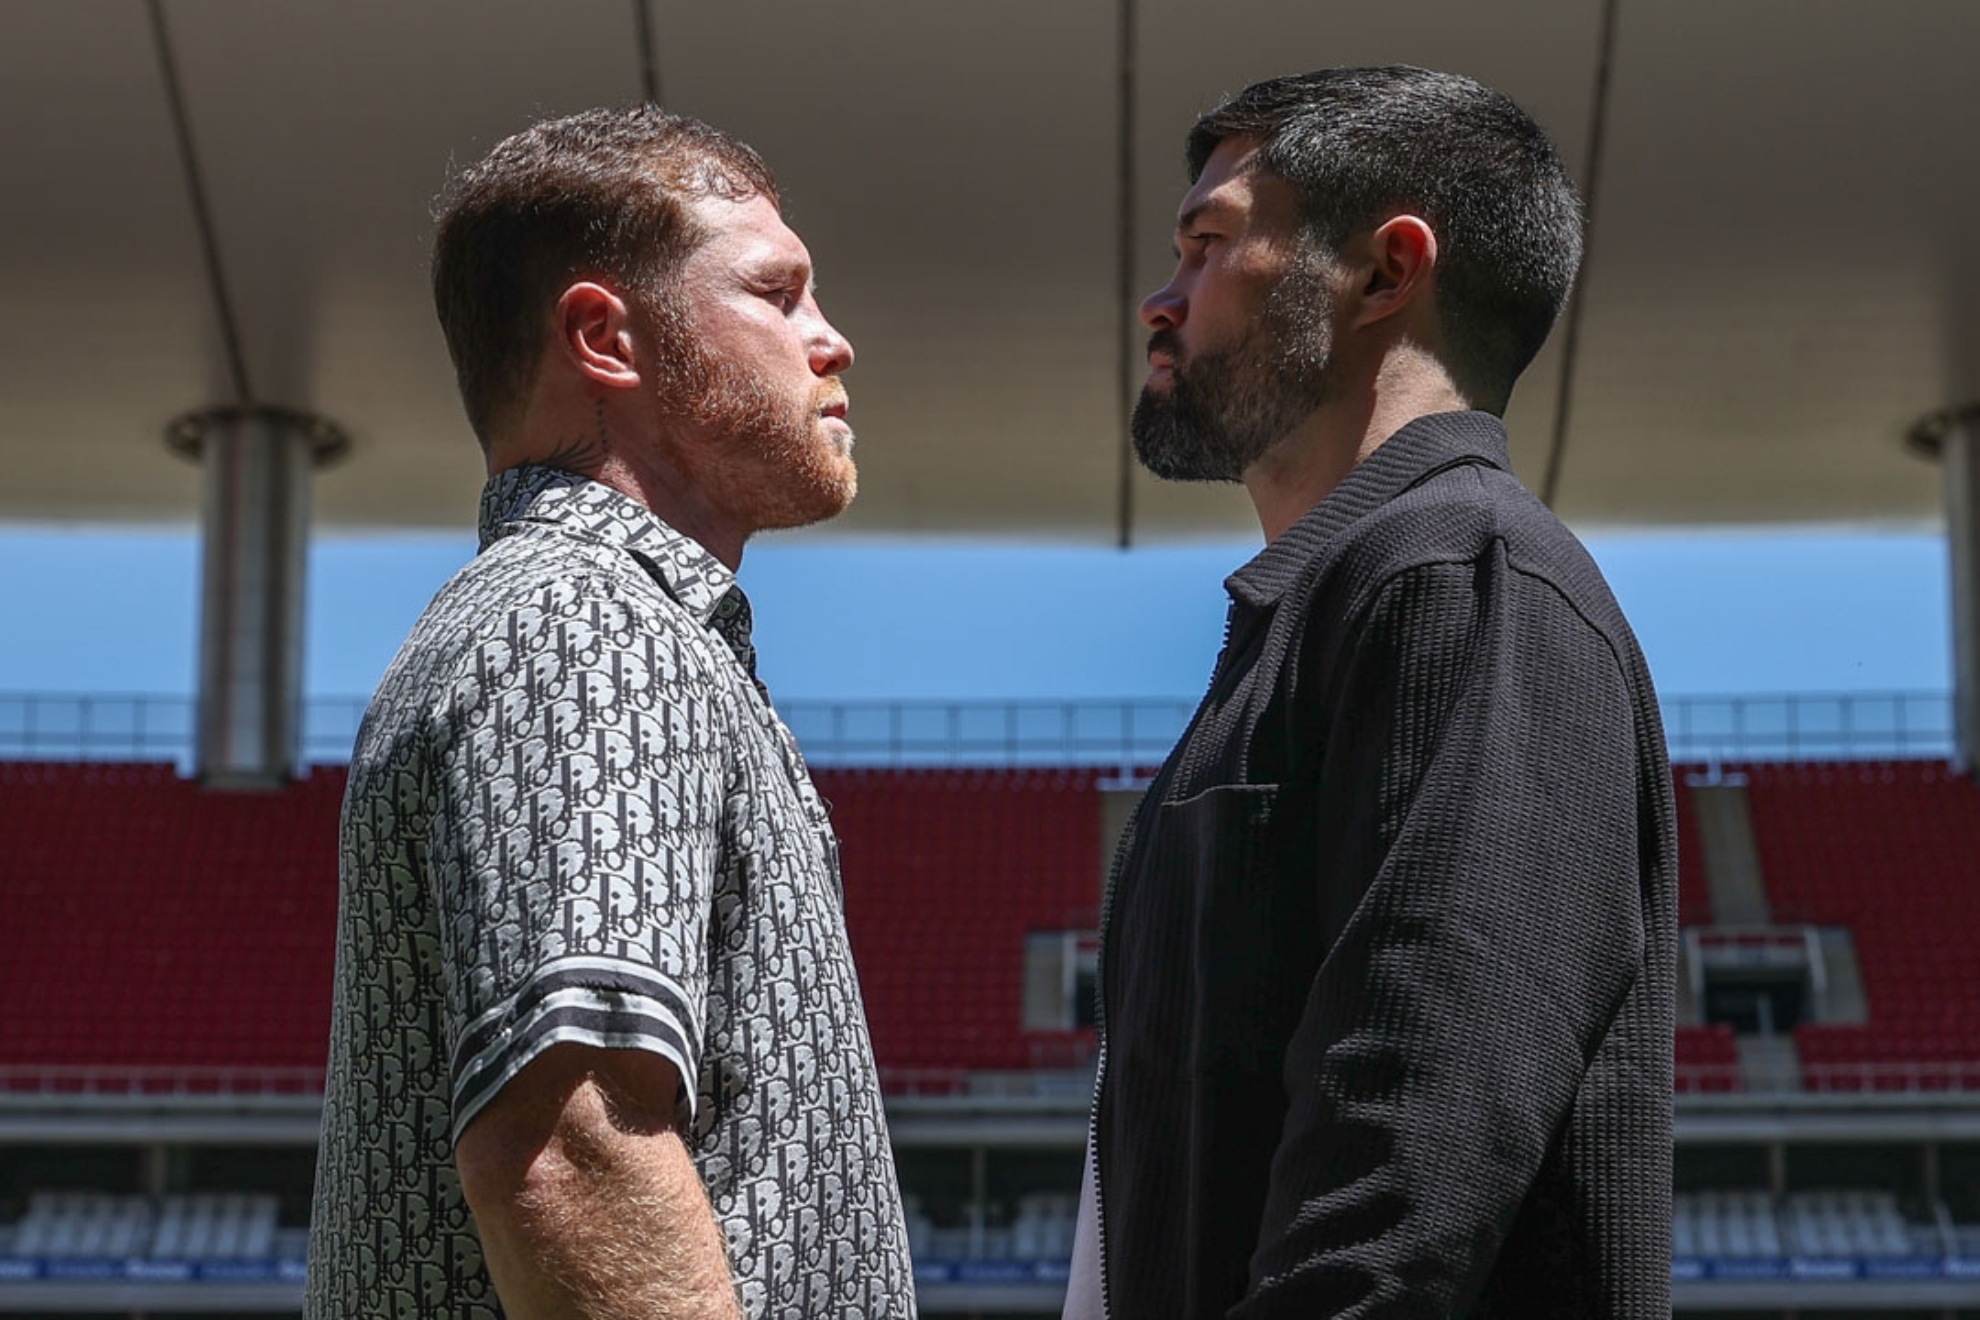 John Ryder says Canelo's rematch in September will be against him.